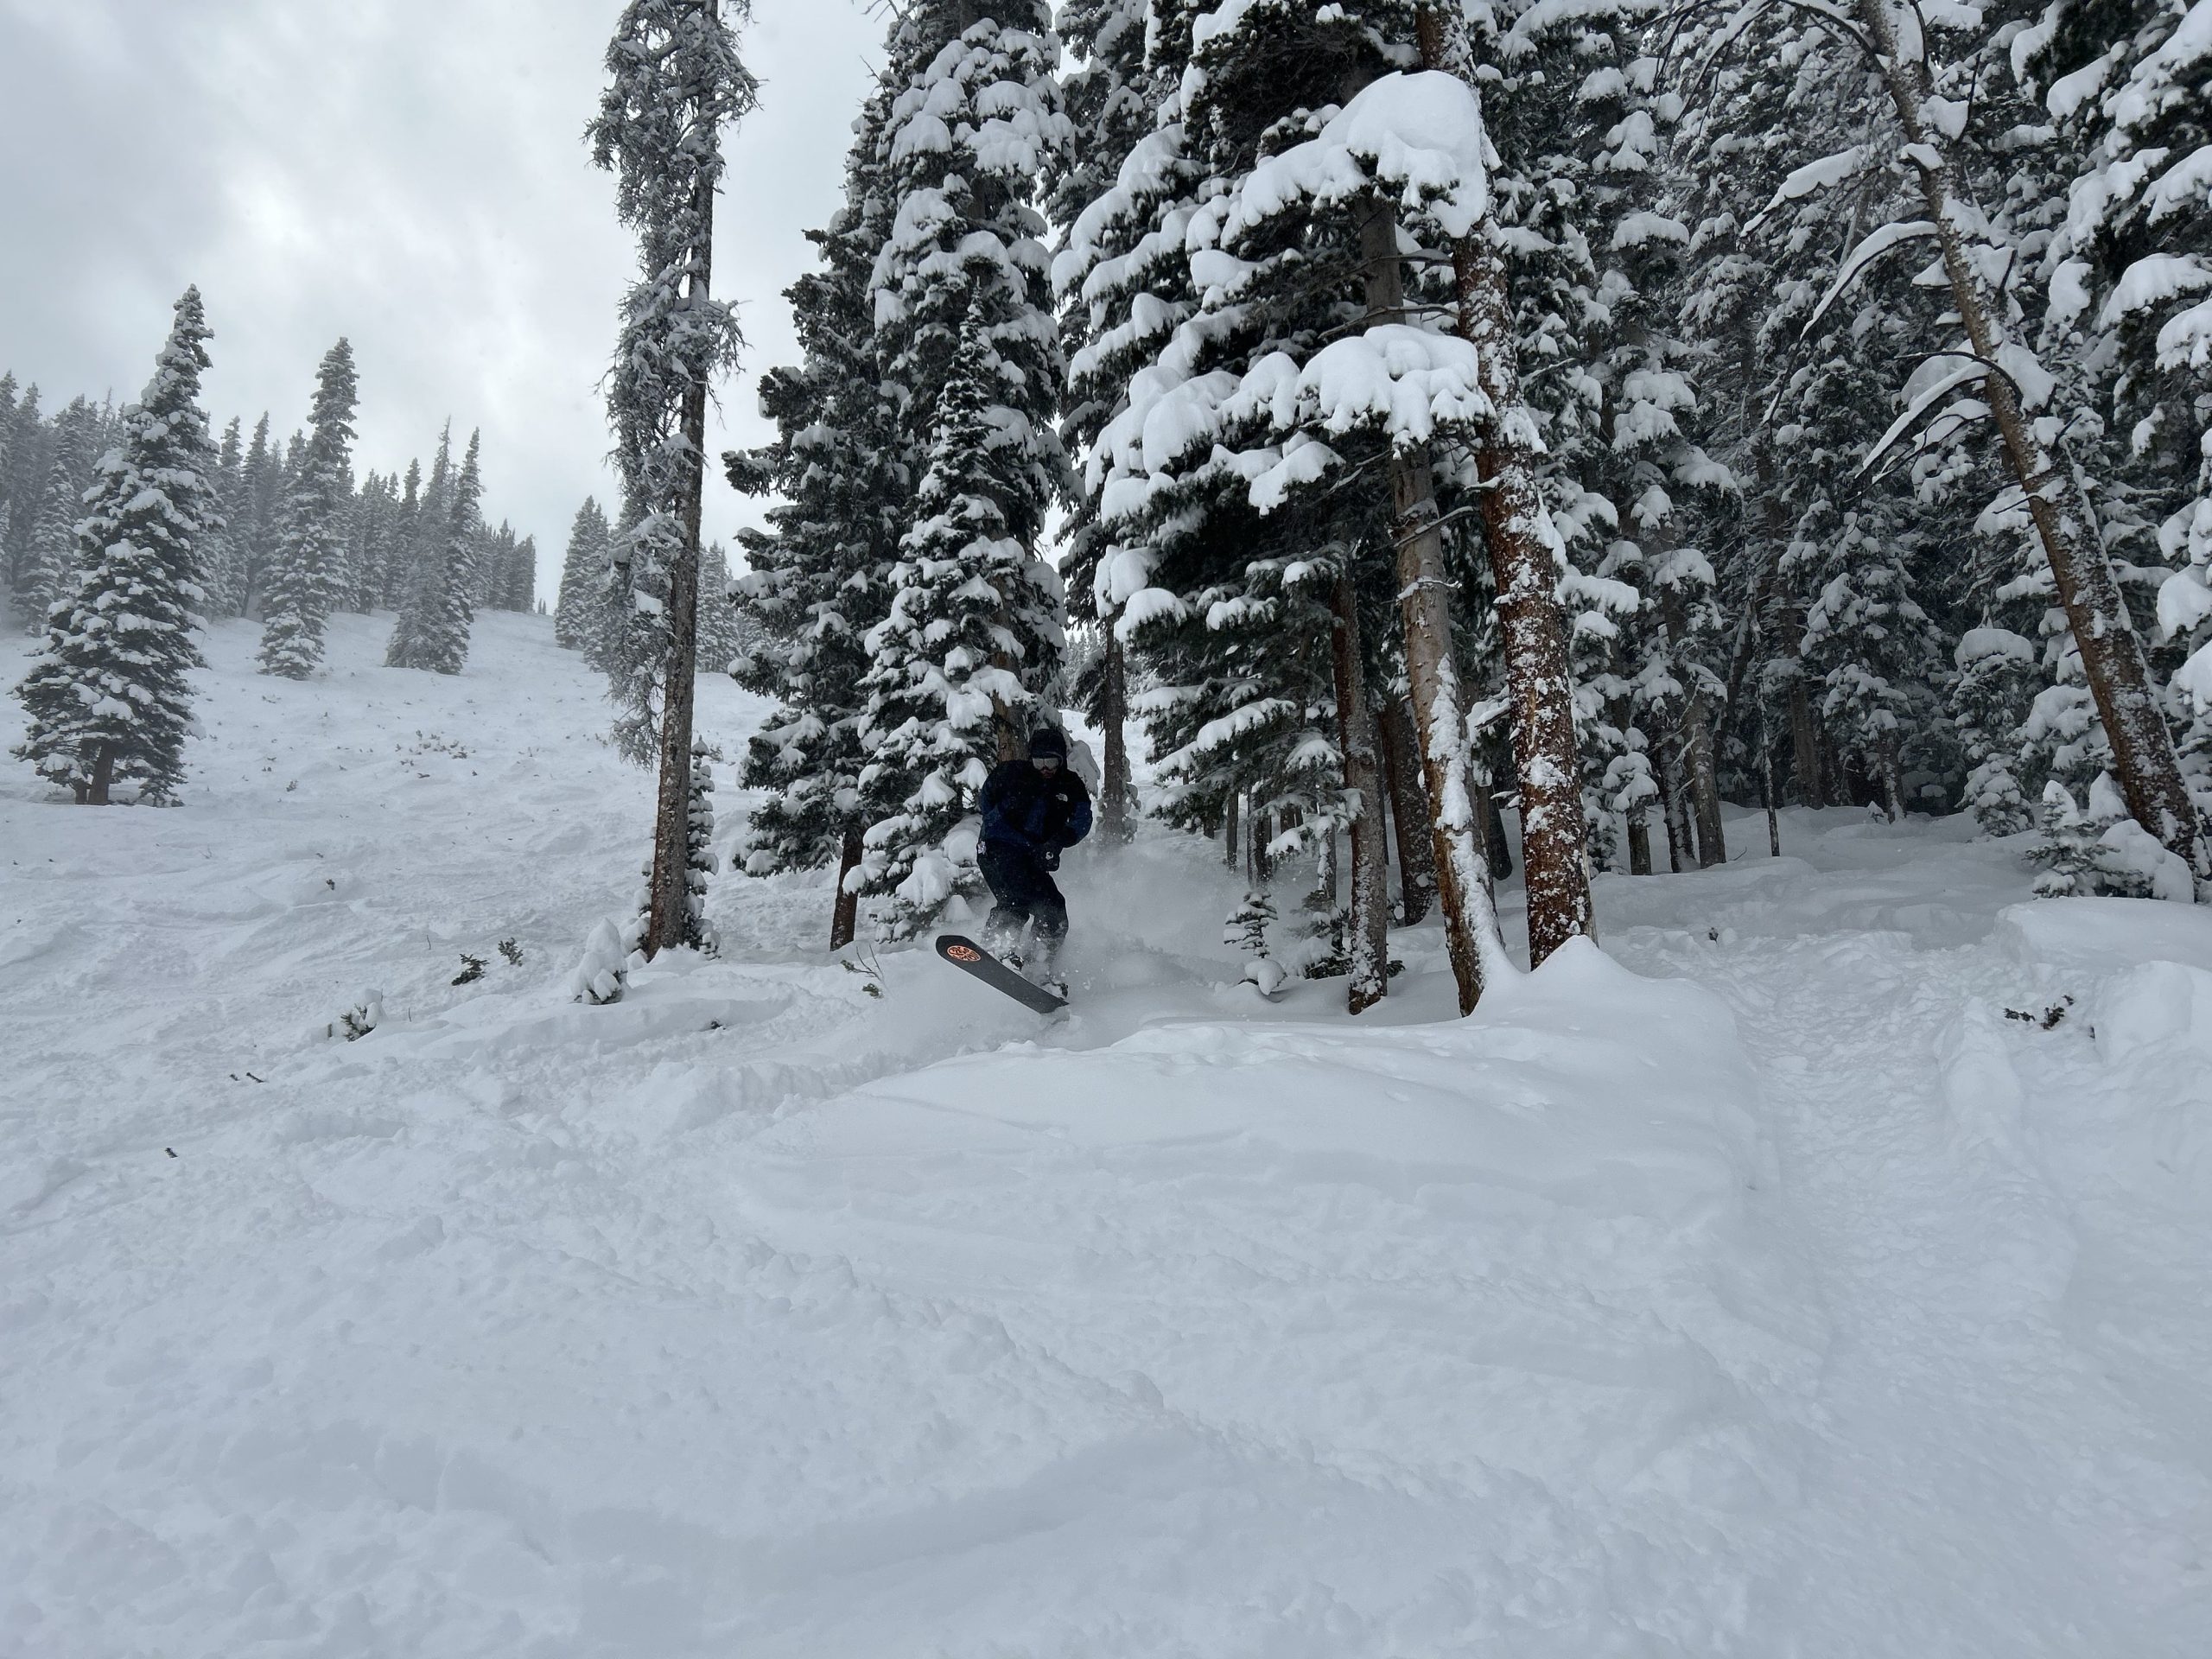 Powder in the Trees, winter park powder day,